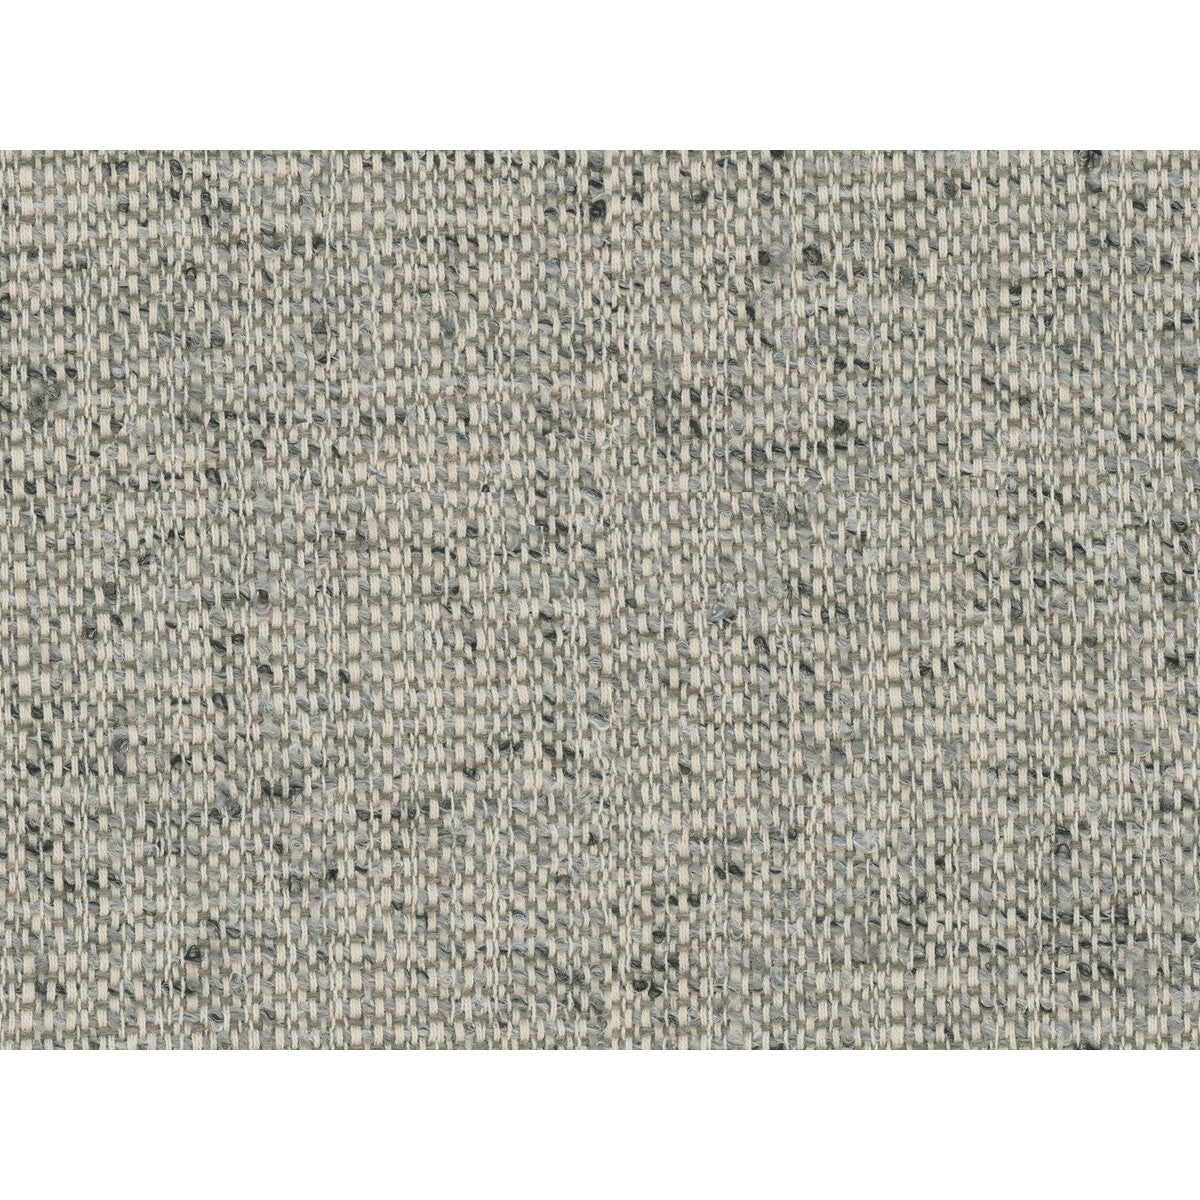 Benefit fabric in quarry color - pattern 34664.11.0 - by Kravet Contract in the Gis collection